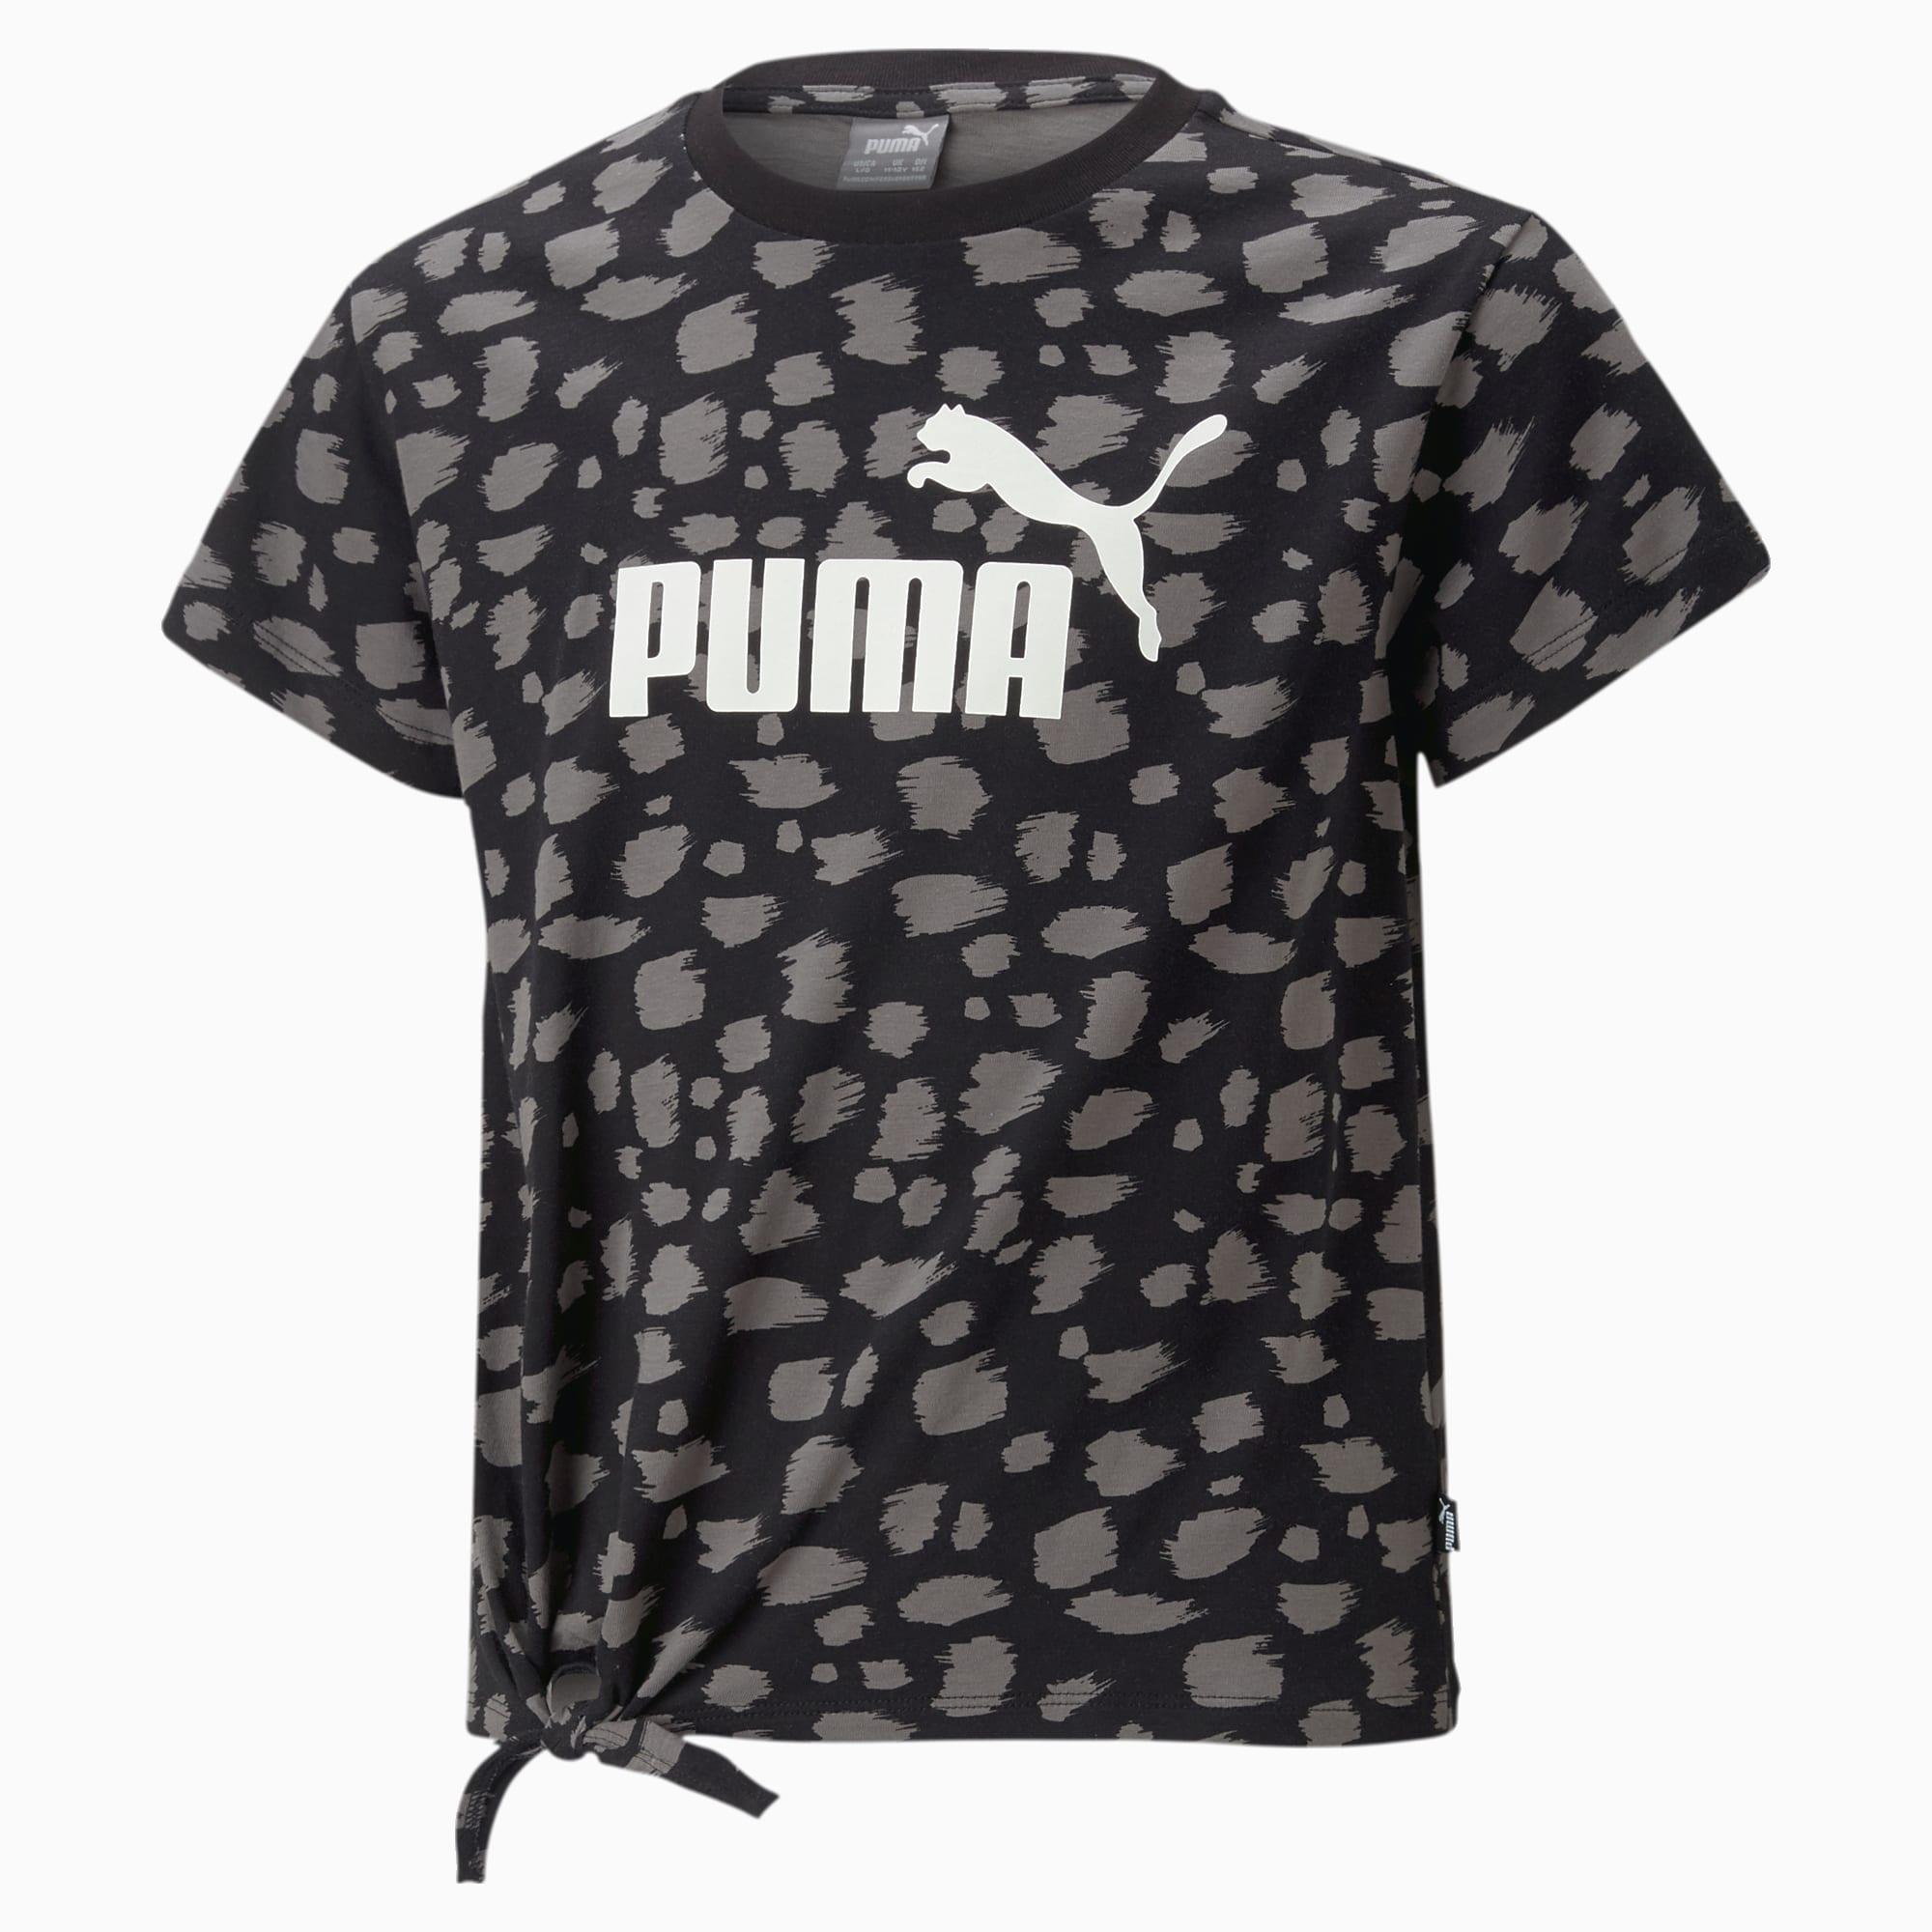 Knotted | Youth Tee Animal Essentials+ Printed | PUMA